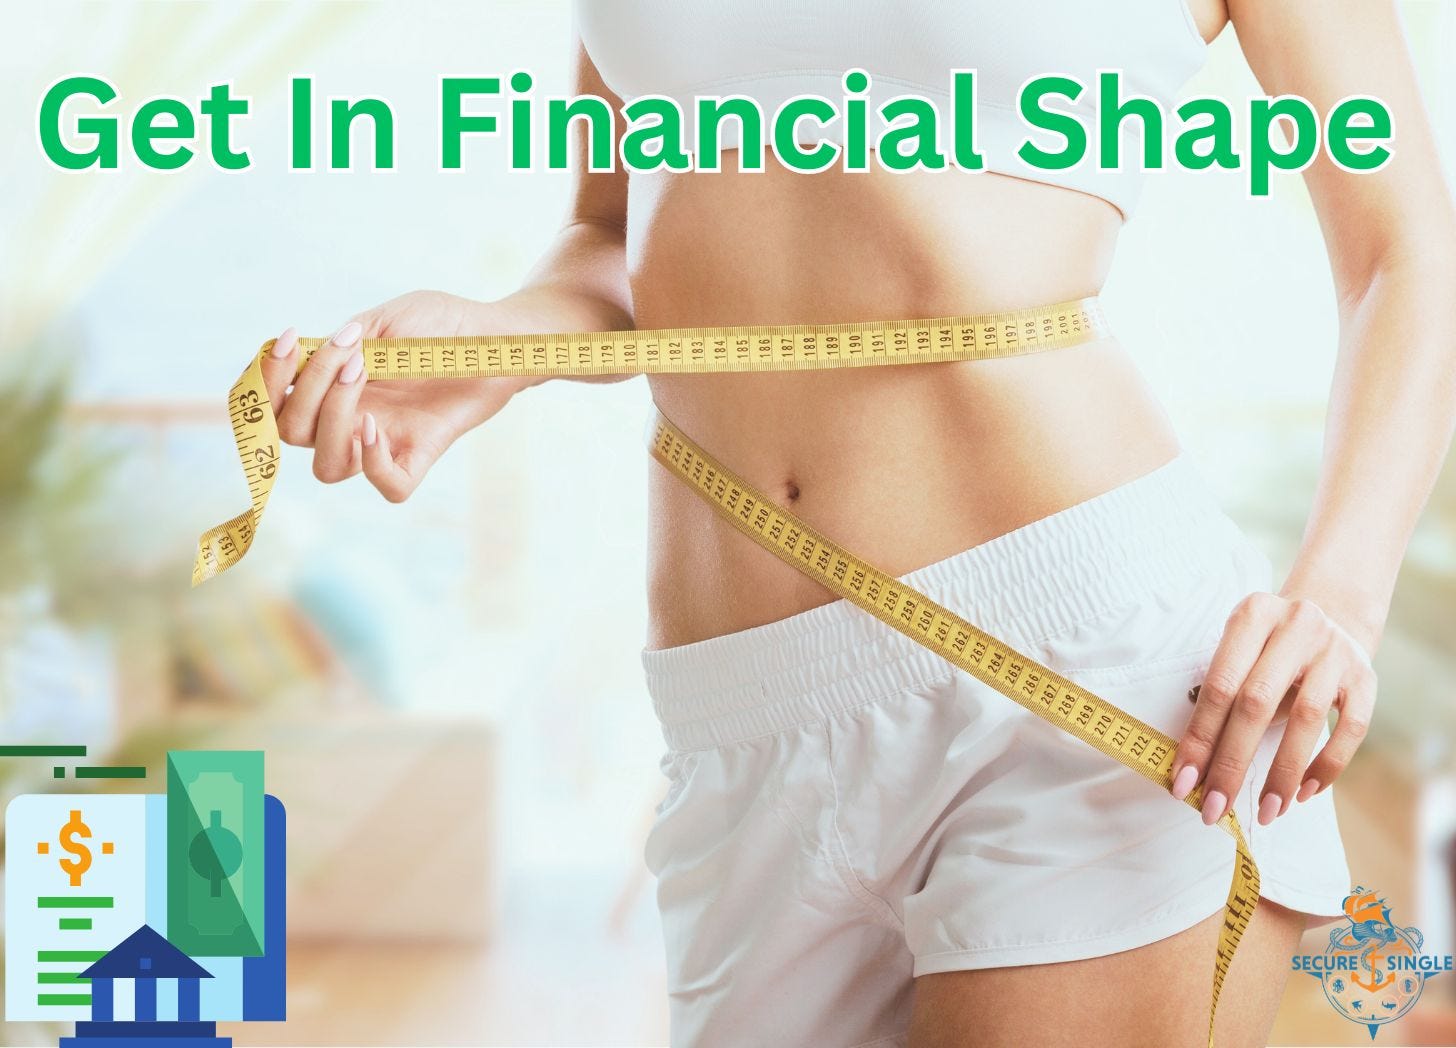 A woman is measuring her waist with a tape measure. The message “get in financial shape” on the image